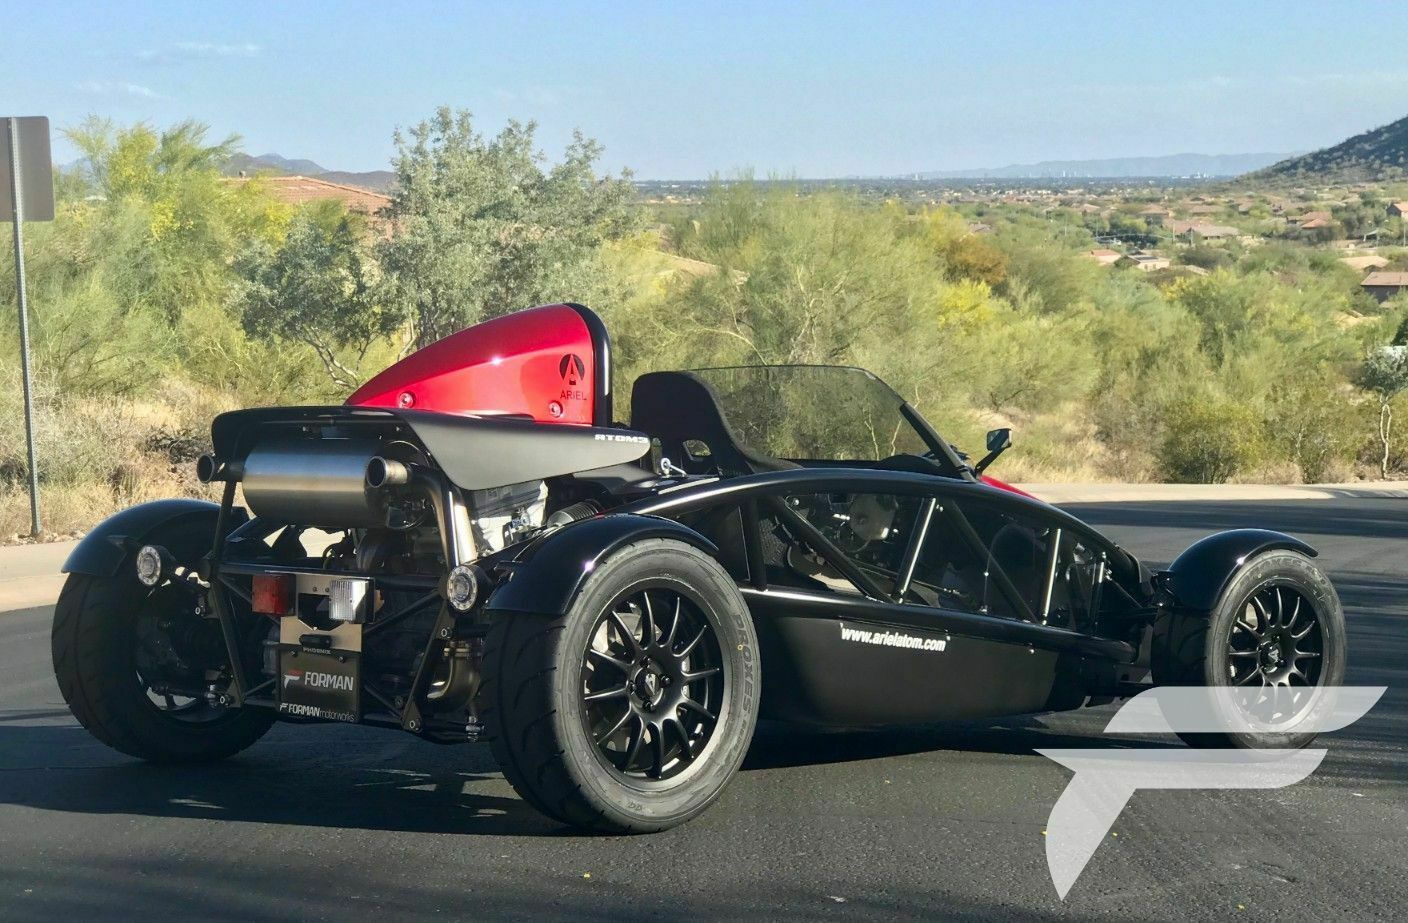 2018 Ariel Atom 3 Like New 2018 Ariel Atom 3 - Paint-to-sample Soul Red Crystal - No Track Time!